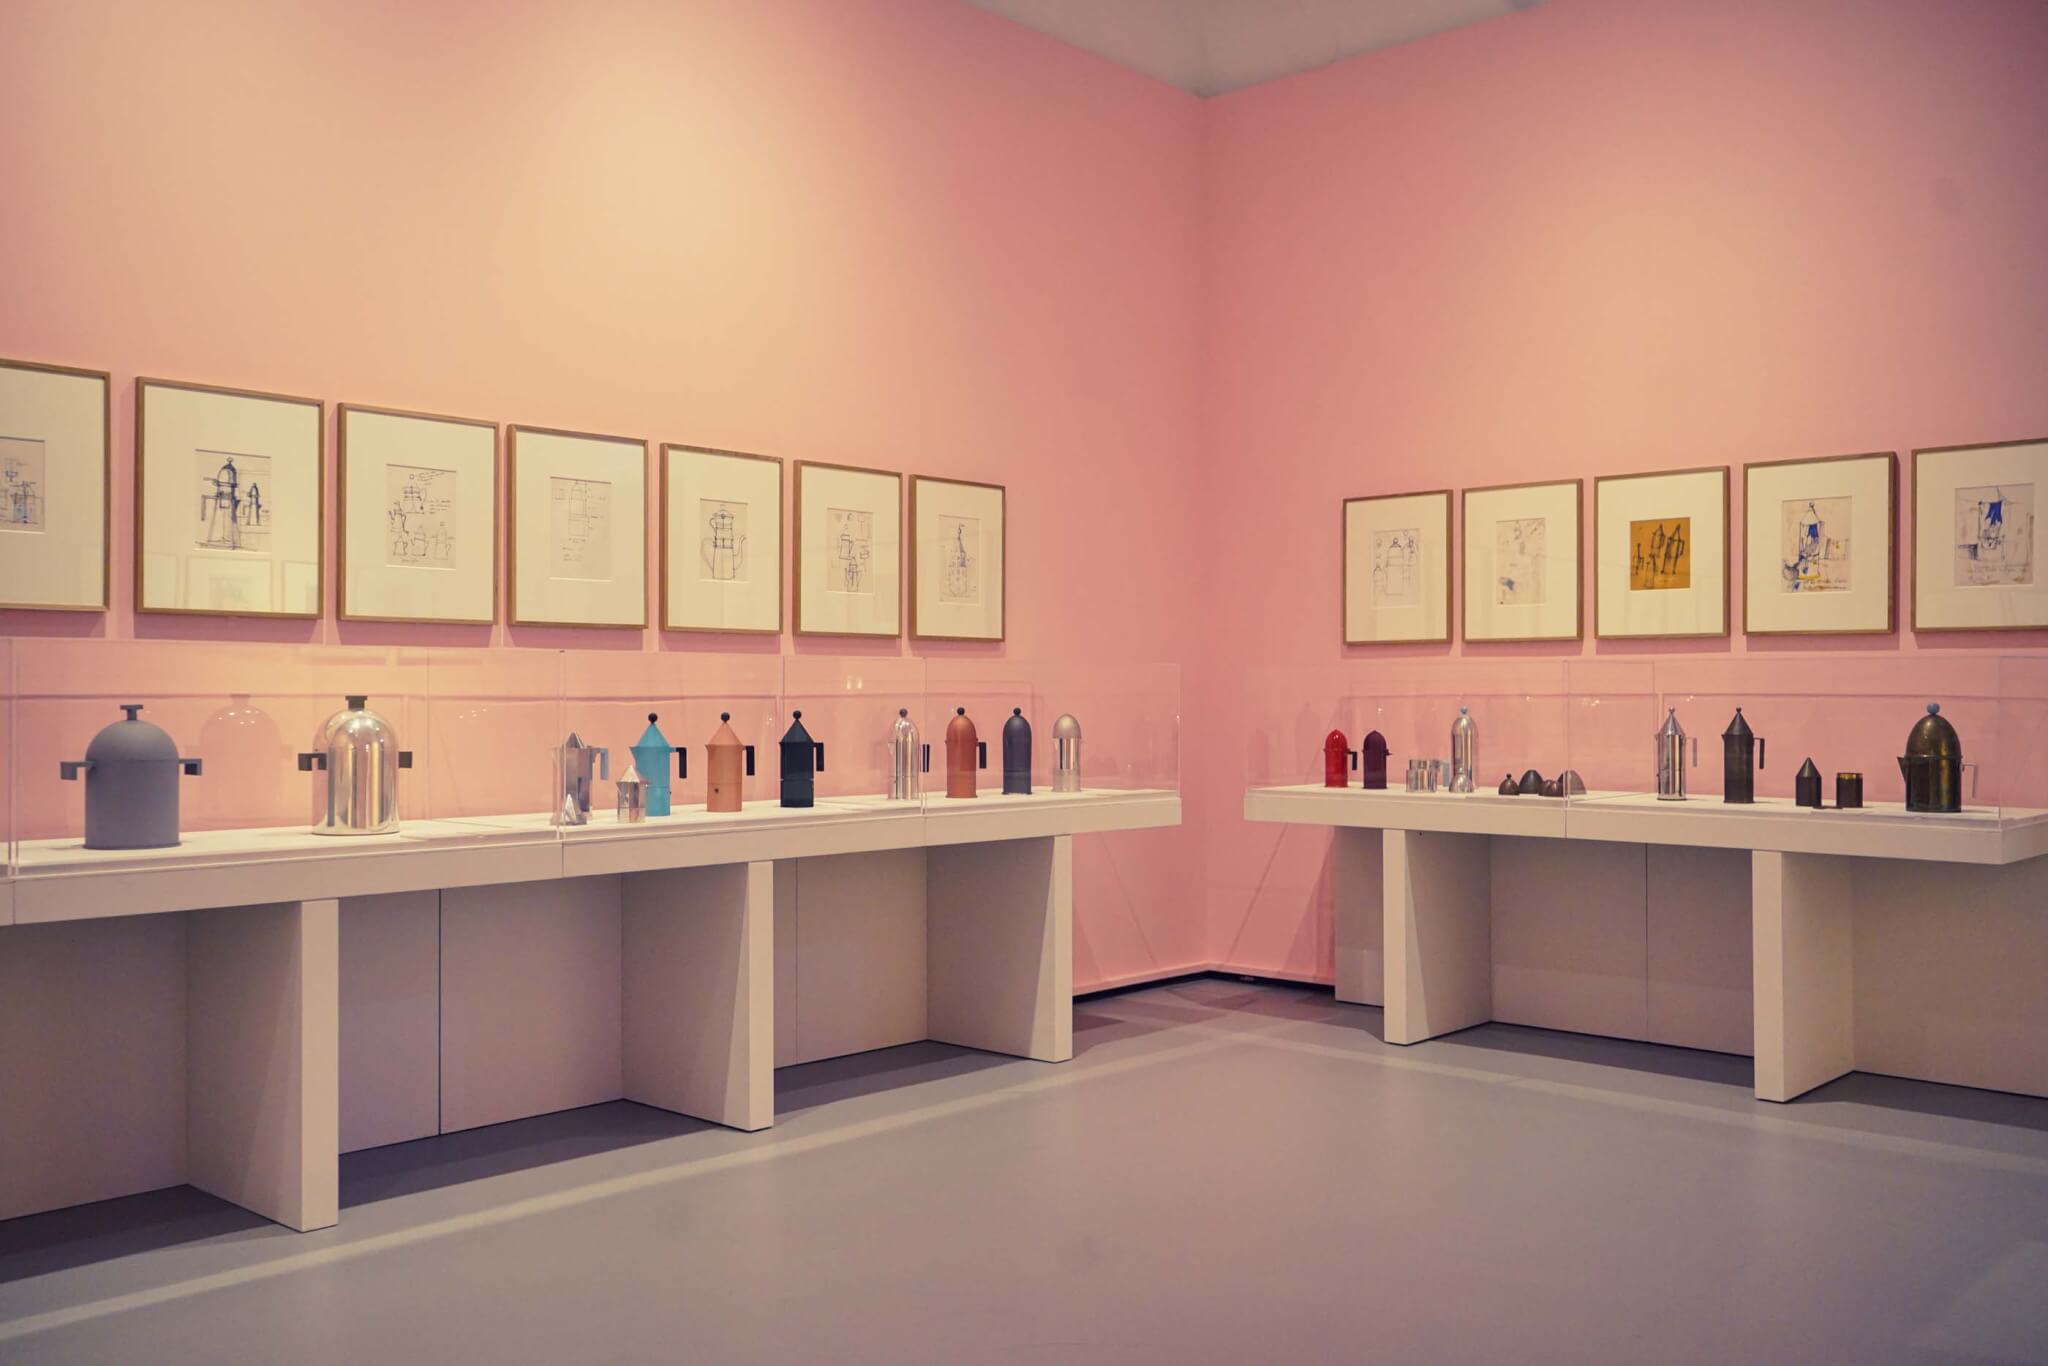 line sketch pink walls and shelves line coffee maker objects